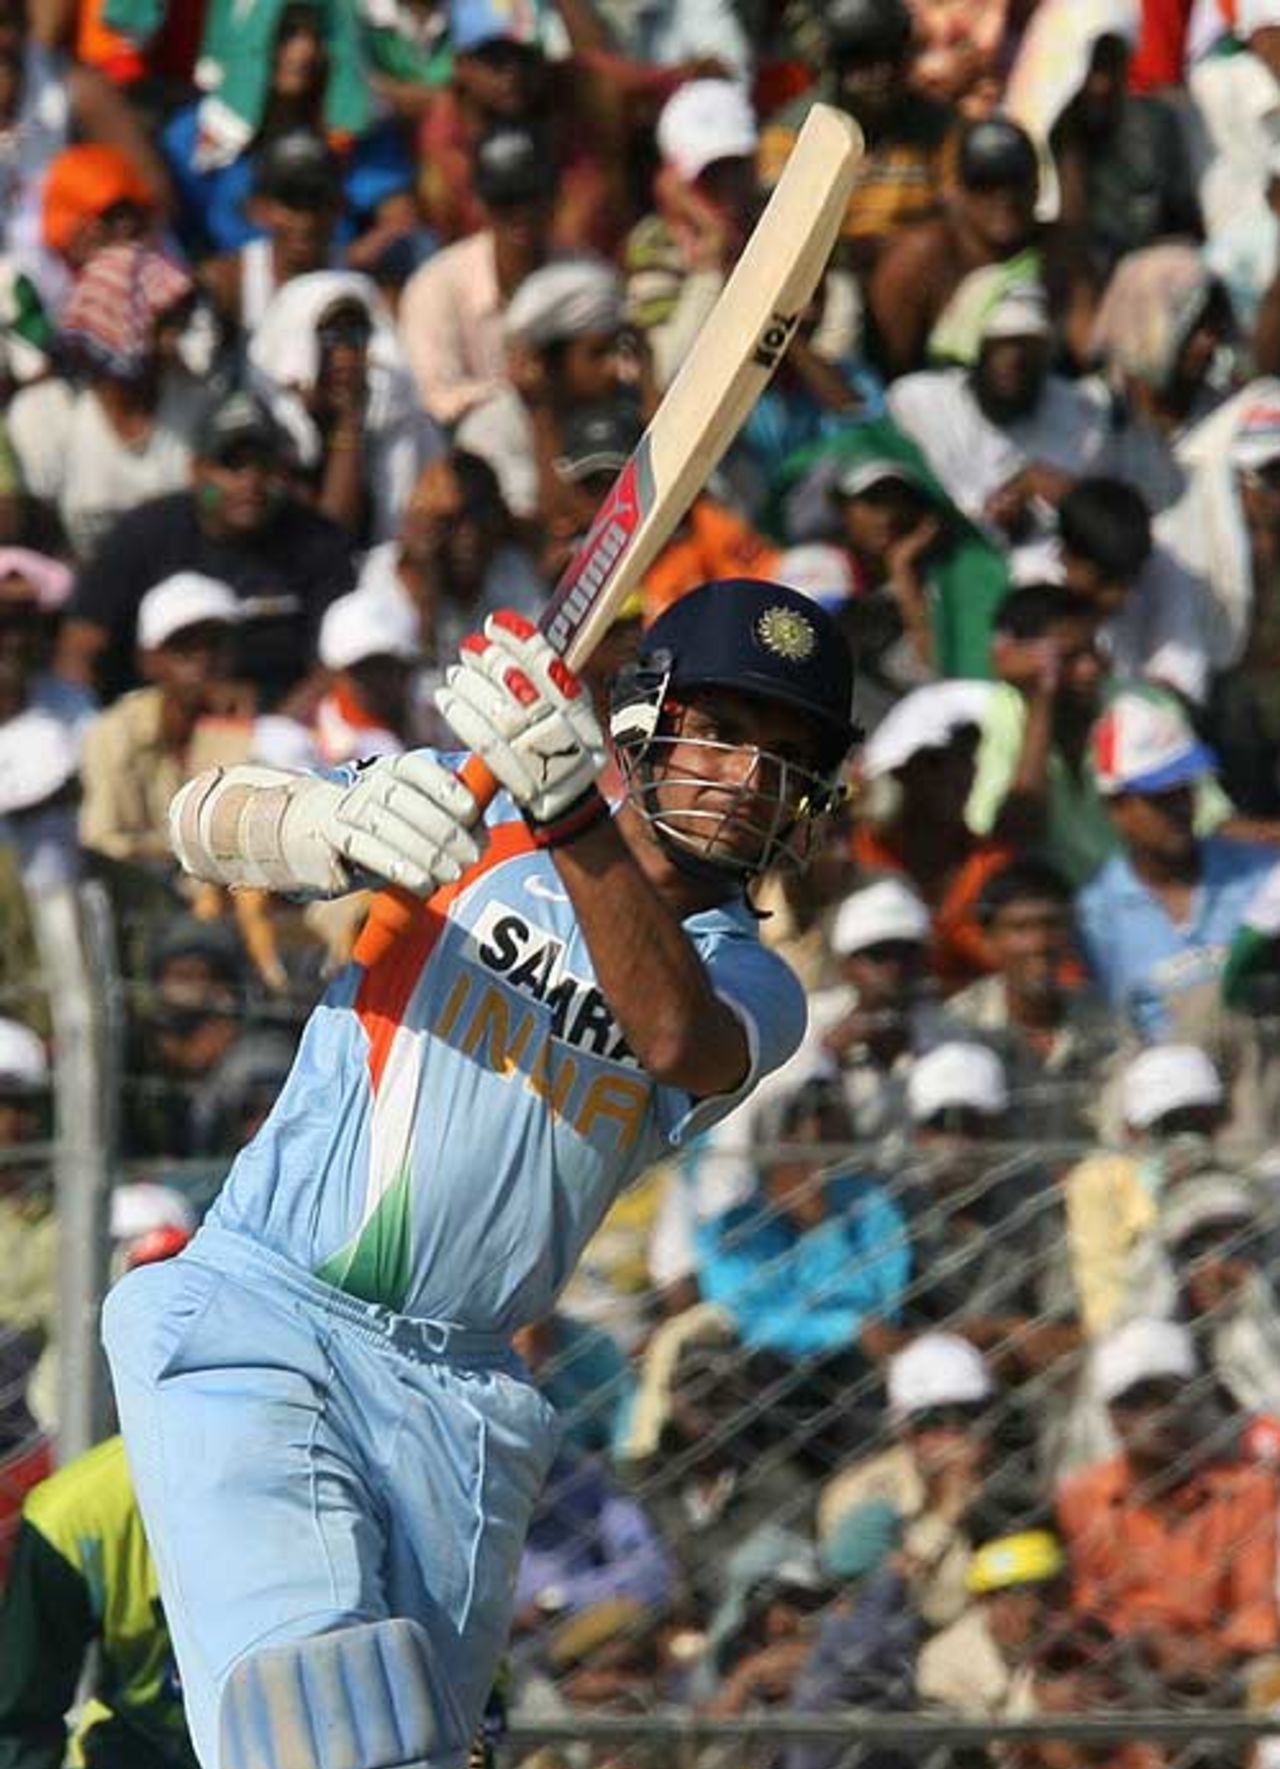 Sourav Ganguly straight drives as India recover from an early loss, India v Pakistan, 1st ODI, Guwahati, November 5, 2007